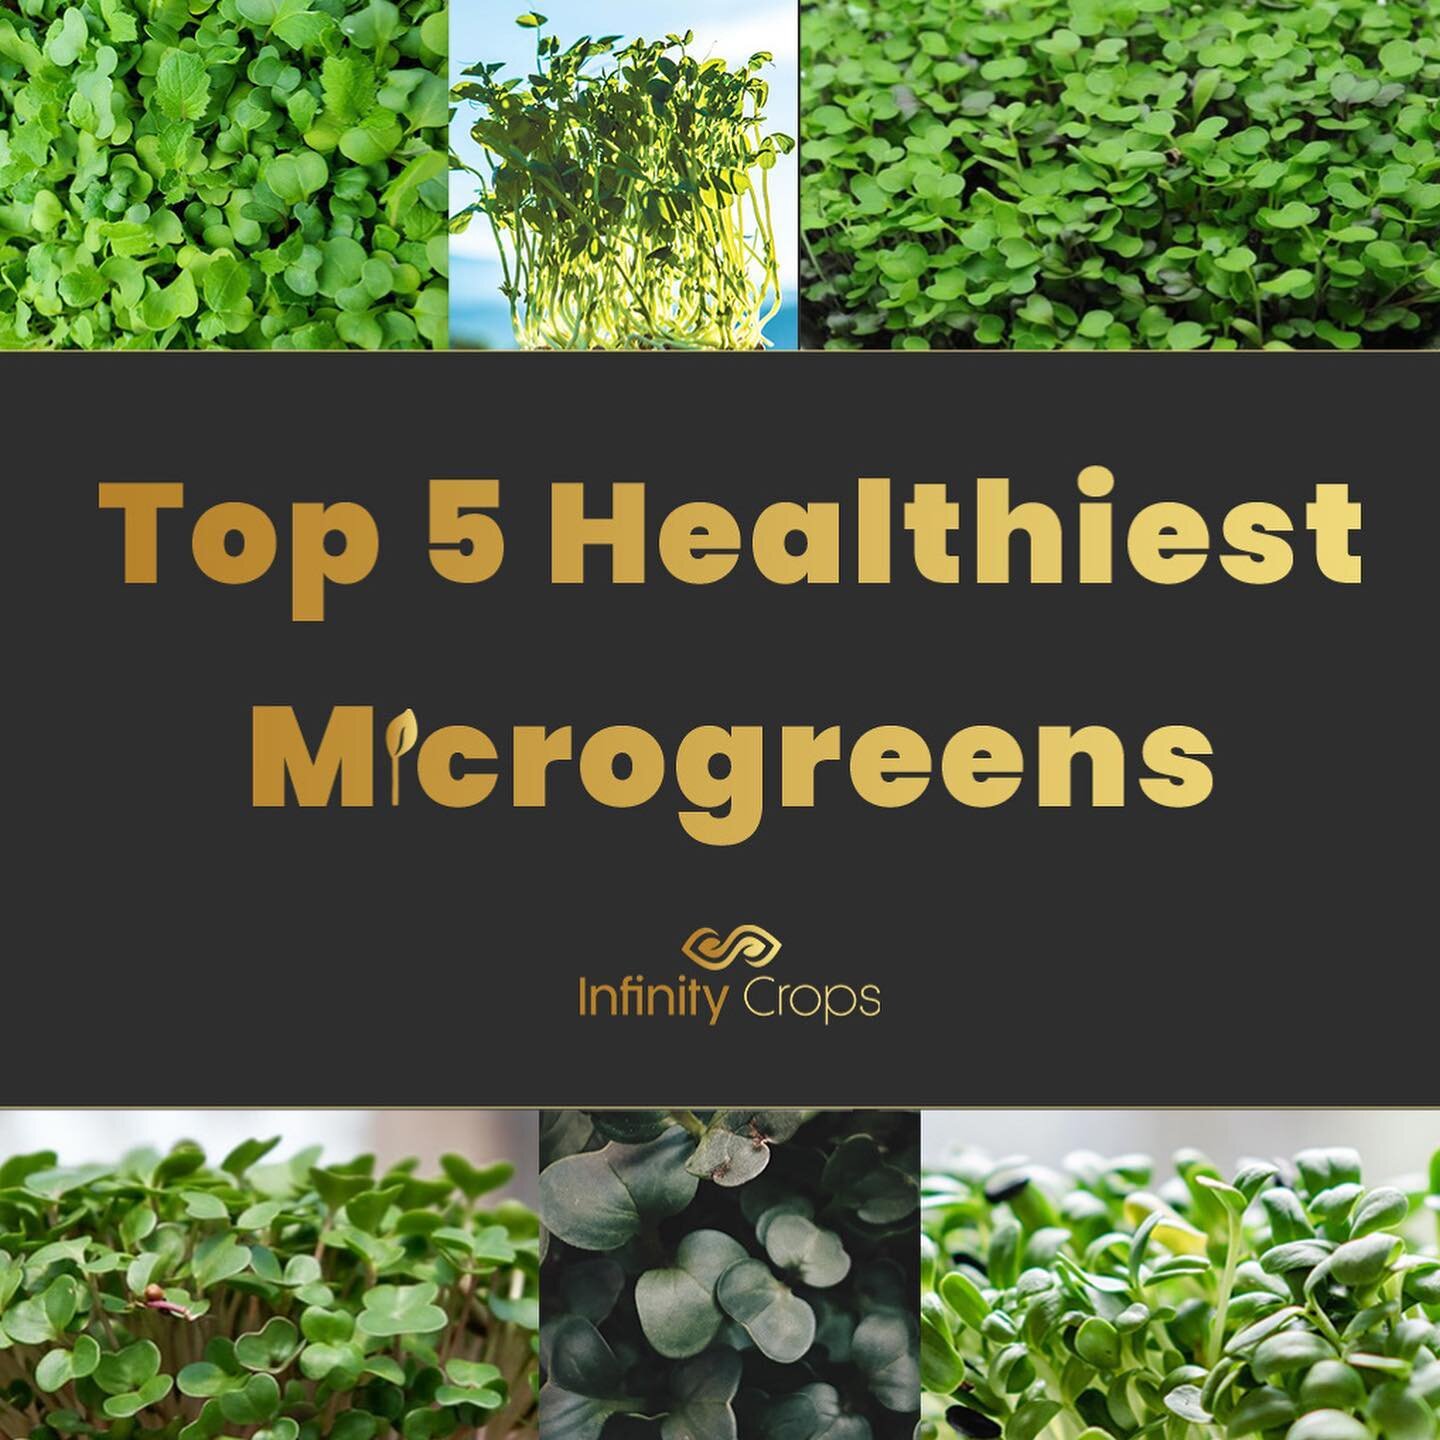 🌱🌱 What&rsquo;s your favorite microgreen? 🌱🌱

&mdash;&mdash;&mdash;&mdash;&mdash;&mdash;&mdash;&mdash;&mdash;&mdash;&mdash;&mdash;&mdash;&mdash;&mdash;&mdash;&mdash;

Although all pack a nutritional punch, these microgreens stand out for their ex